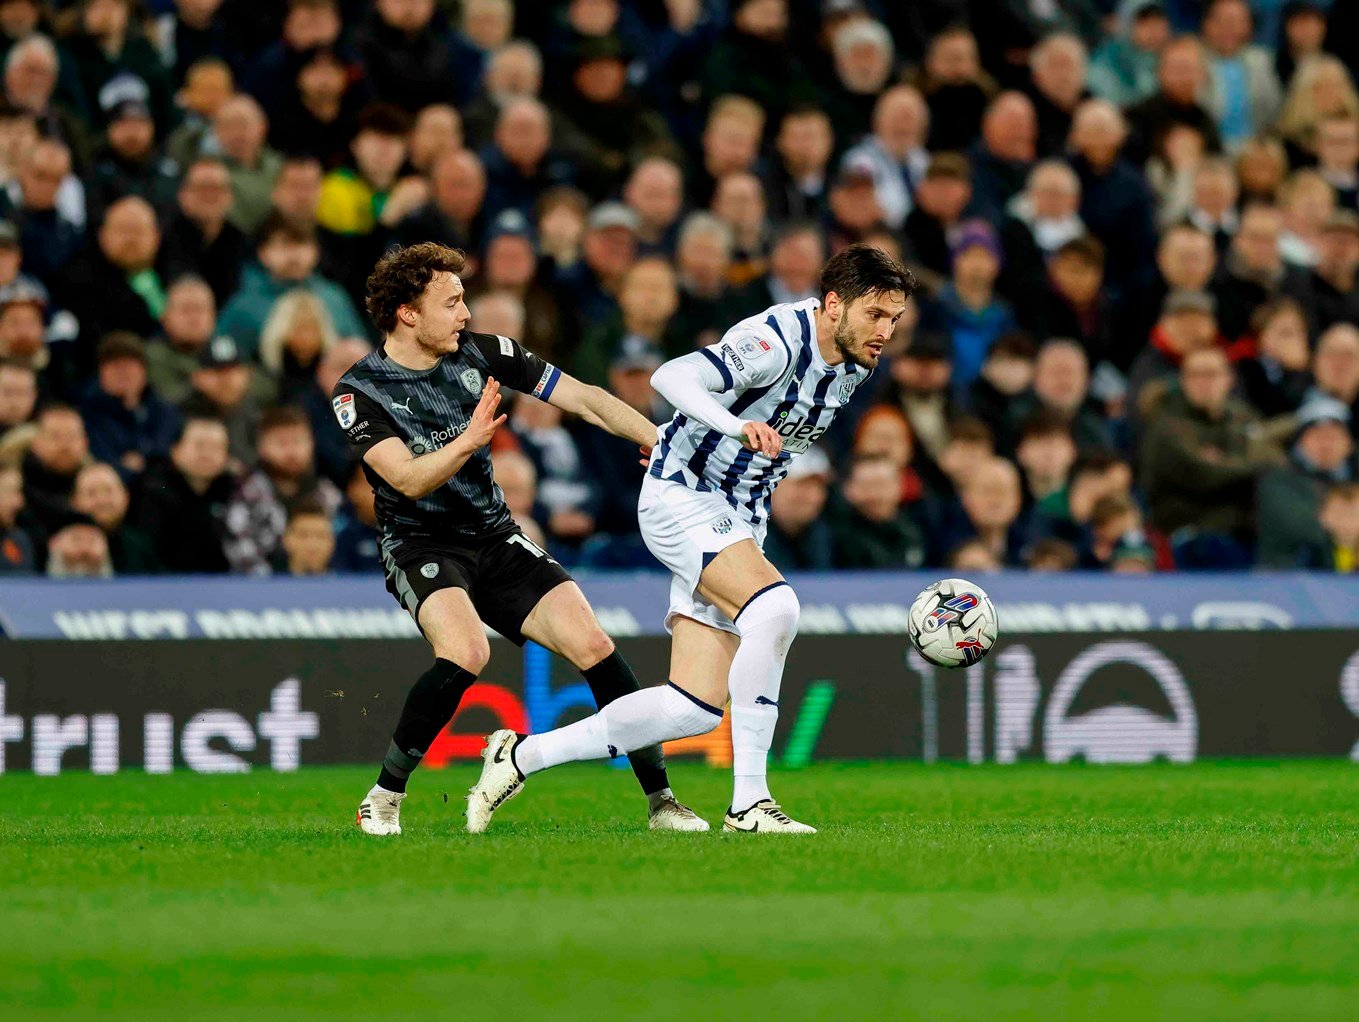 READ | RATHBONE NAMED MATTRESS ONLINE MAN OF THE MATCH FOR WEST BROM PERFORMANCE - News